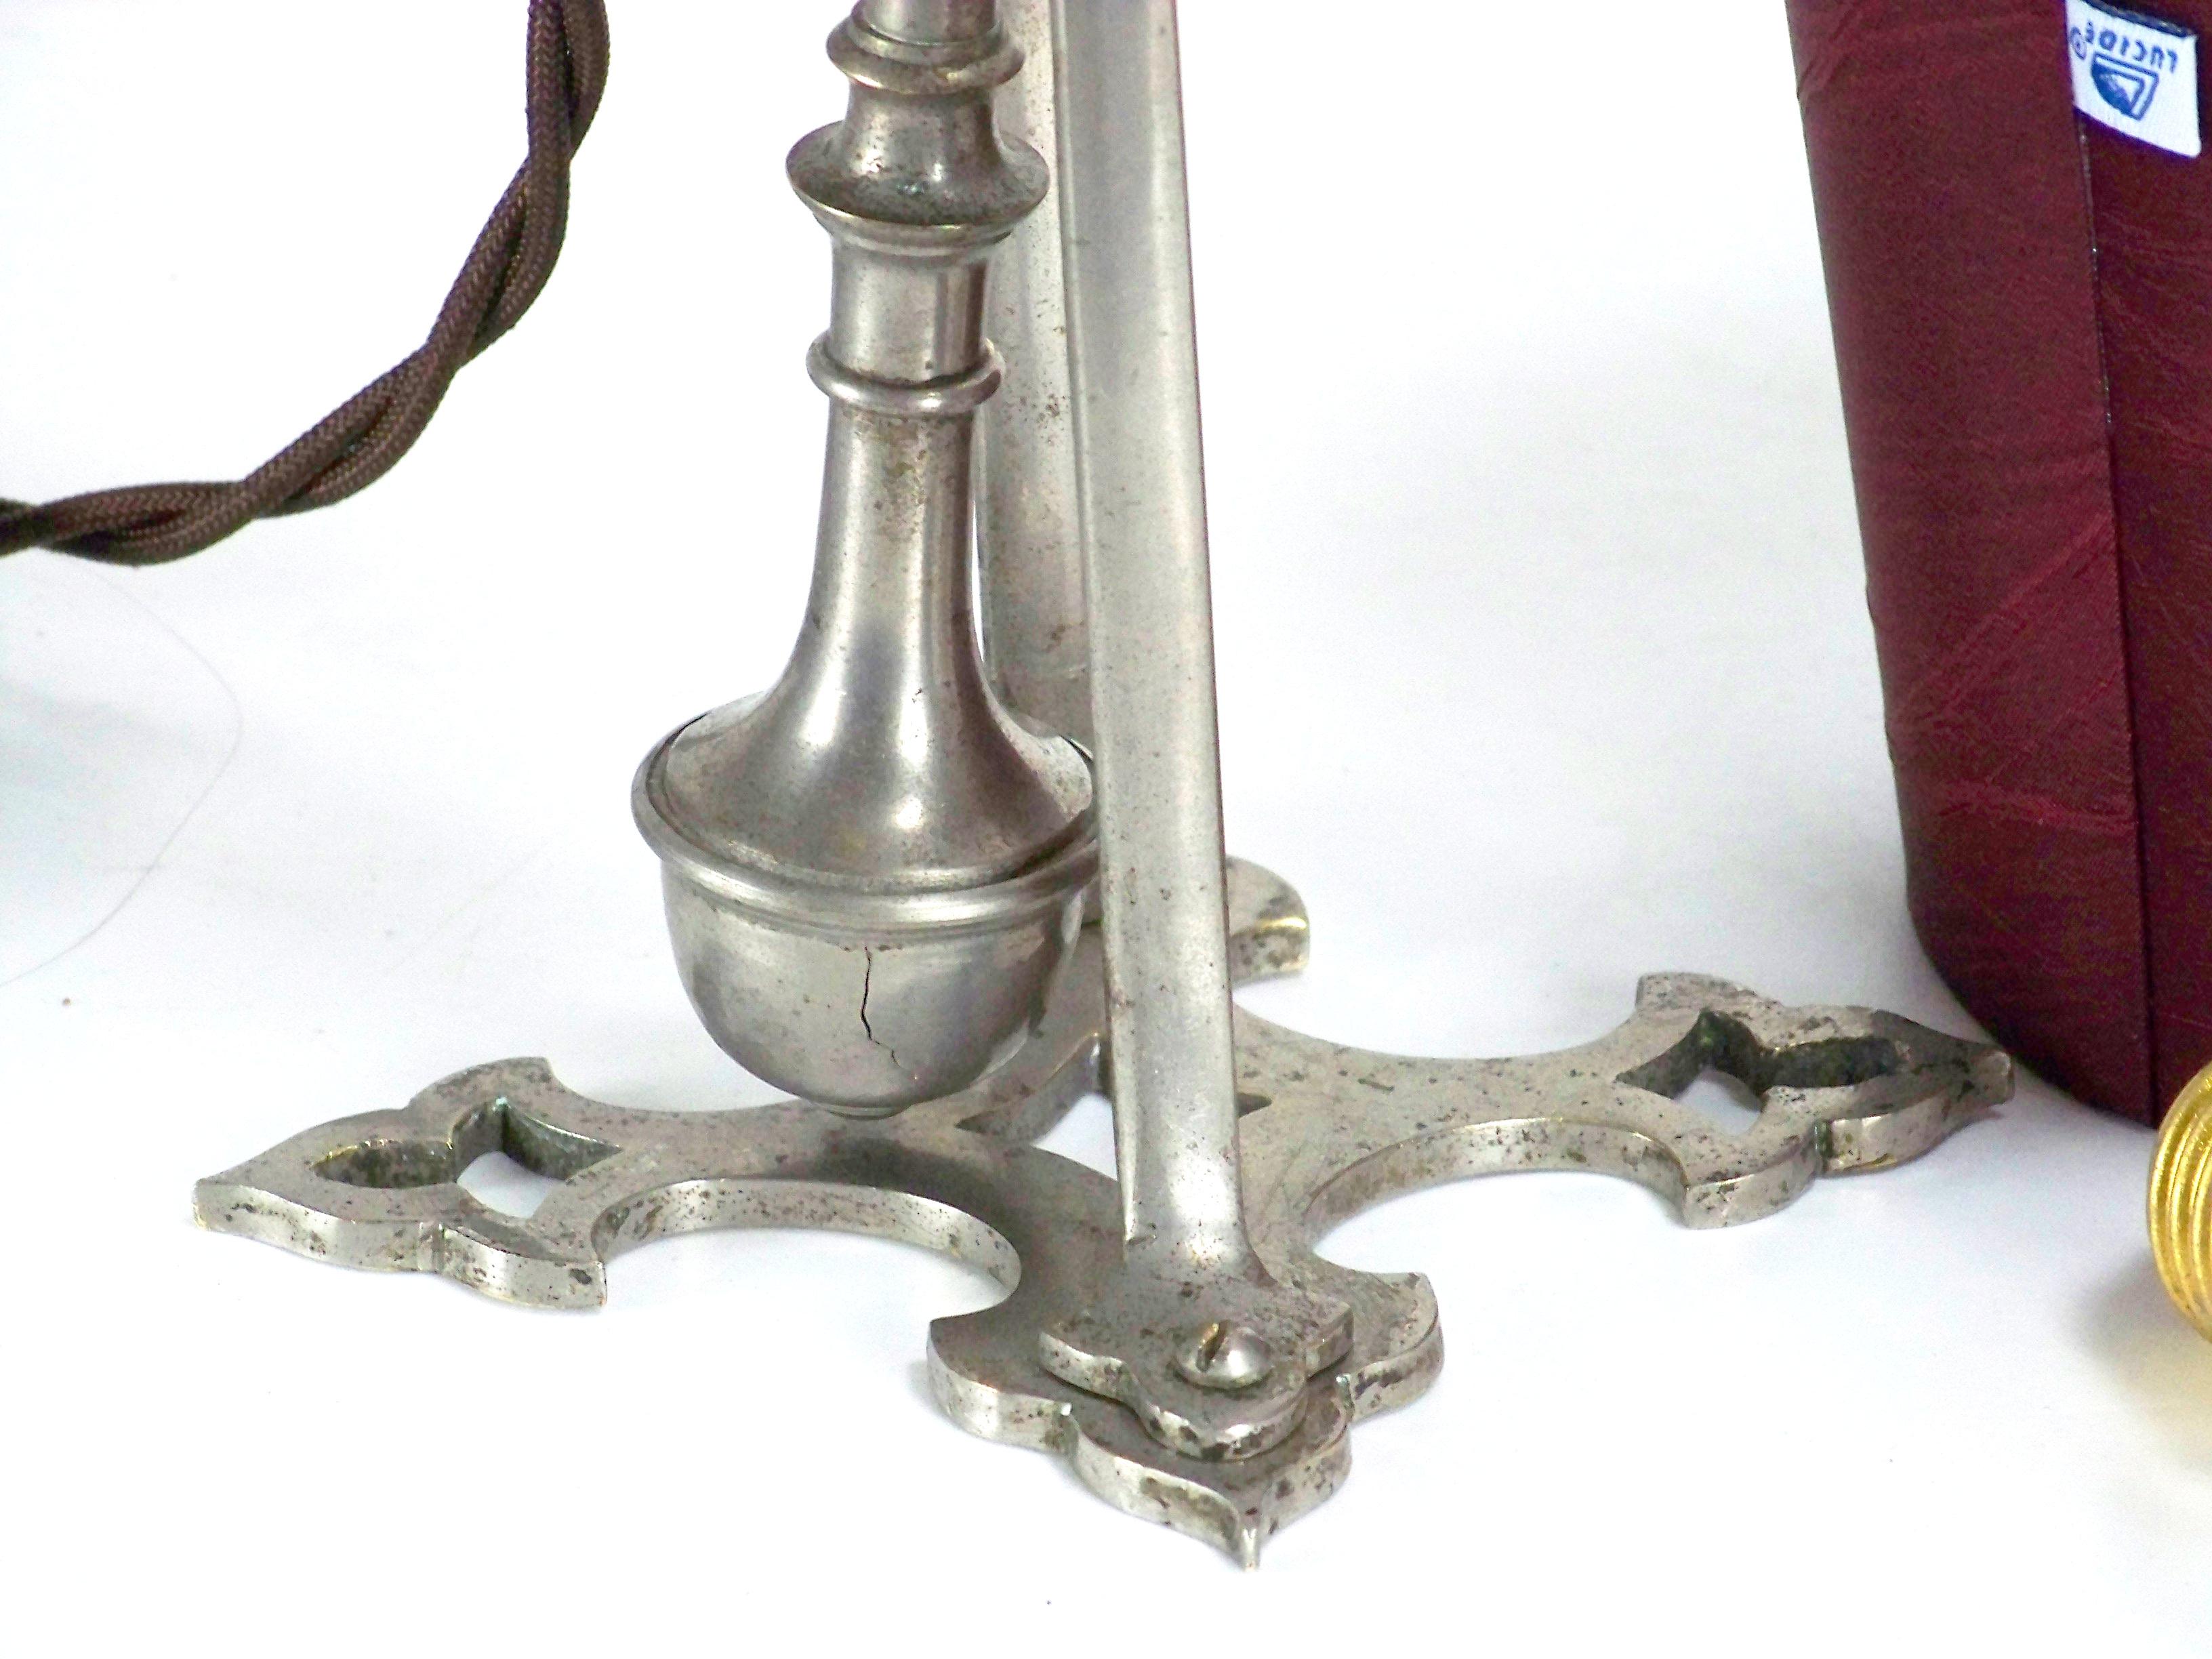 Nickel Art Nouveau Table and Wall Lamp, Central Europe, circa 1915